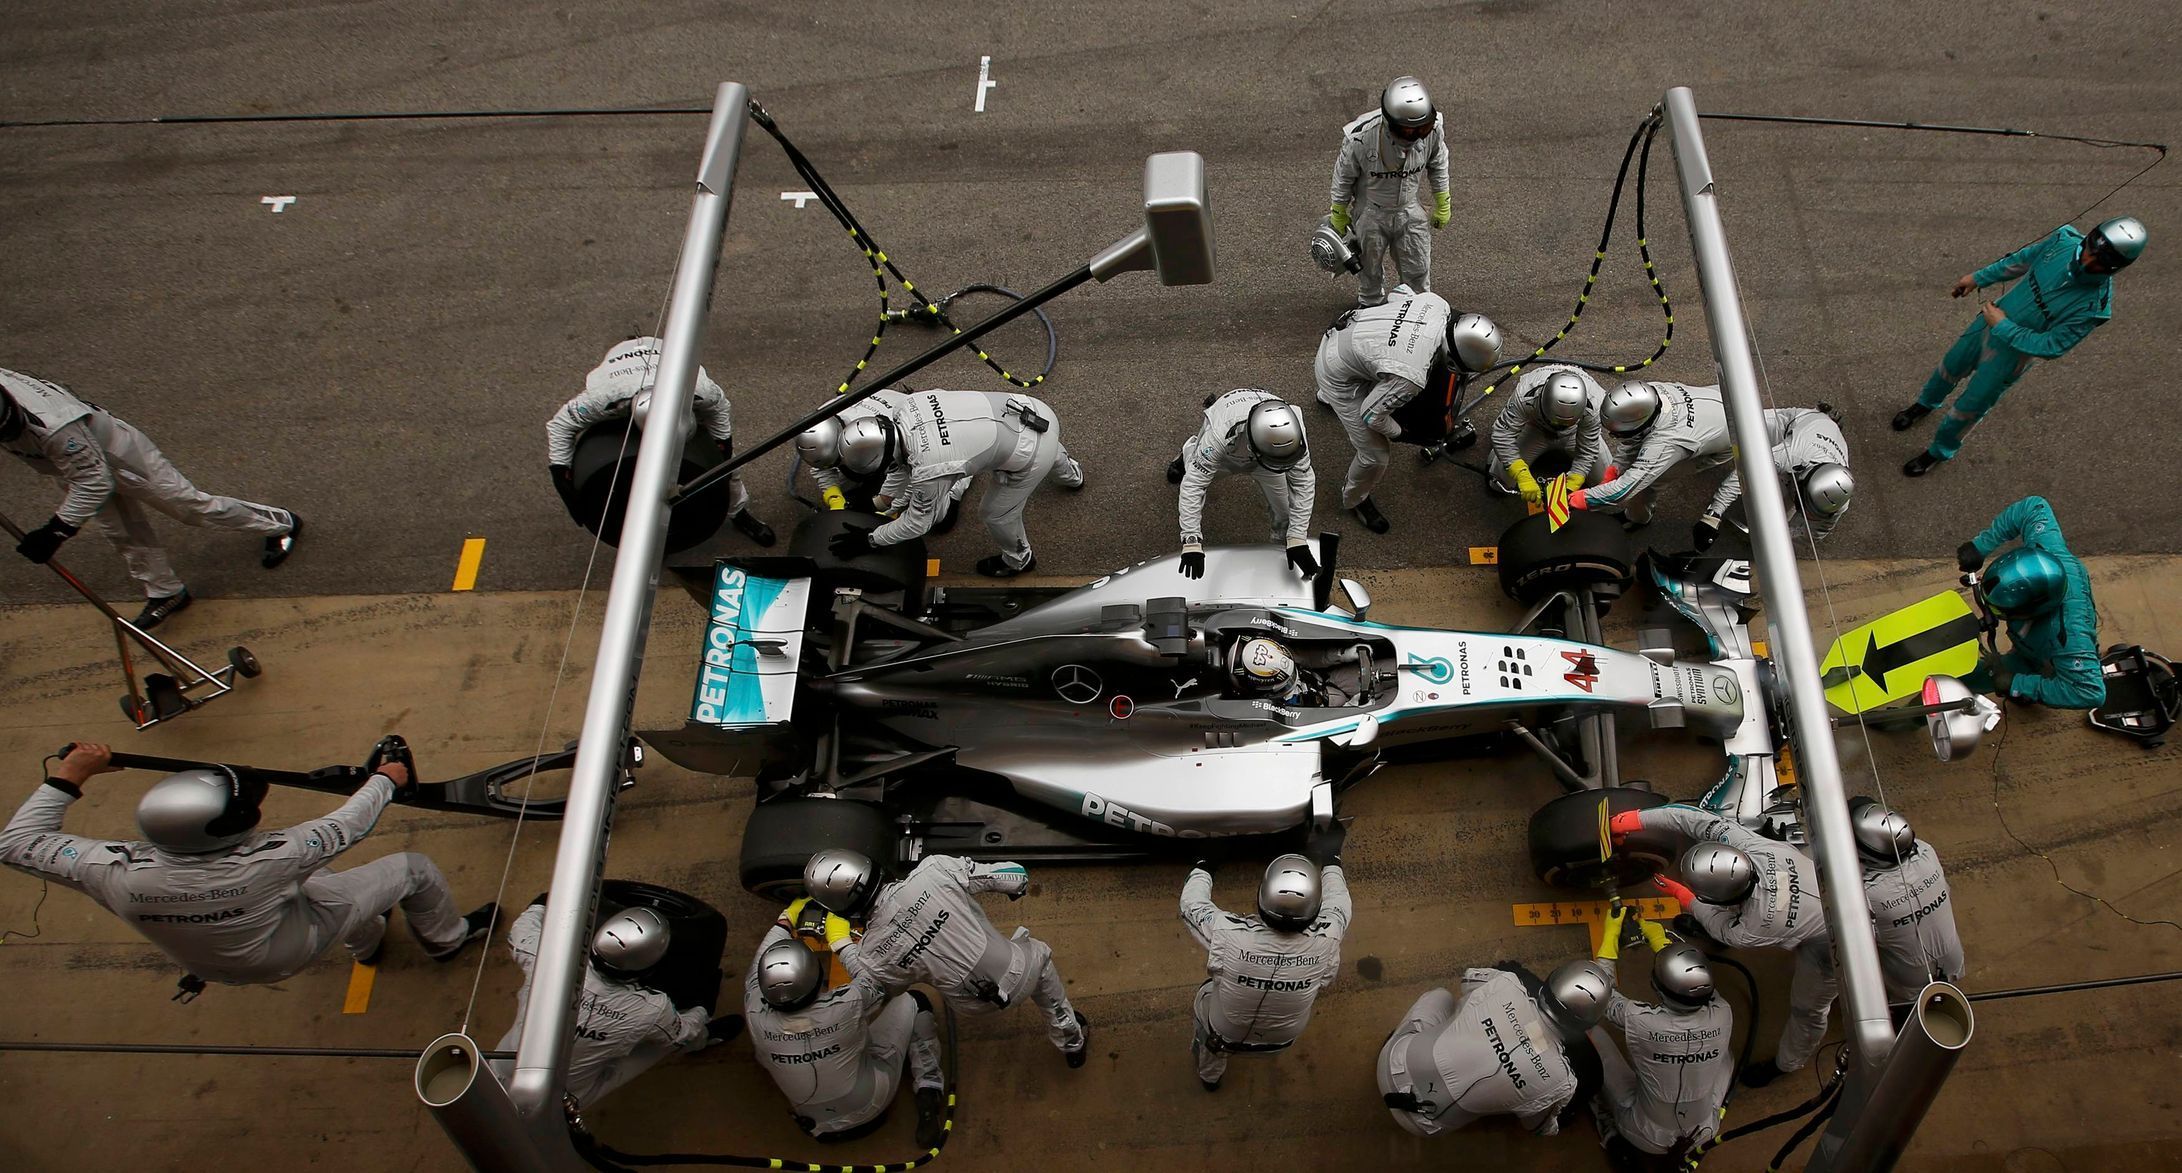 Crew members of Mercedes Formula One driver Hamilton of Britain service the car at pit stop during the Spanish F1 Grand Prix at the Barcelona-Catalunya Circuit in Montmelo